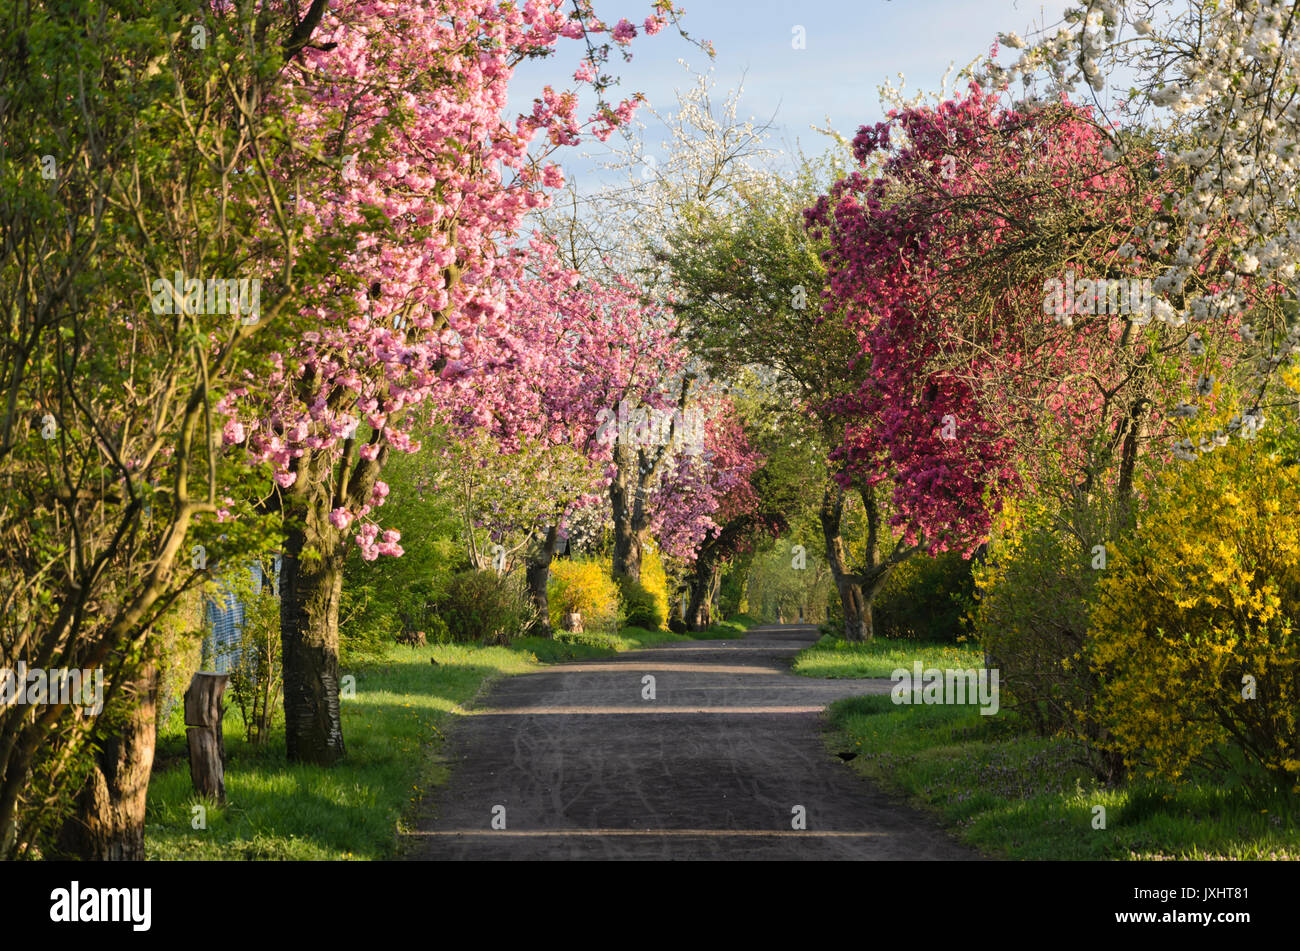 Avenue with flowering fruit trees Stock Photo